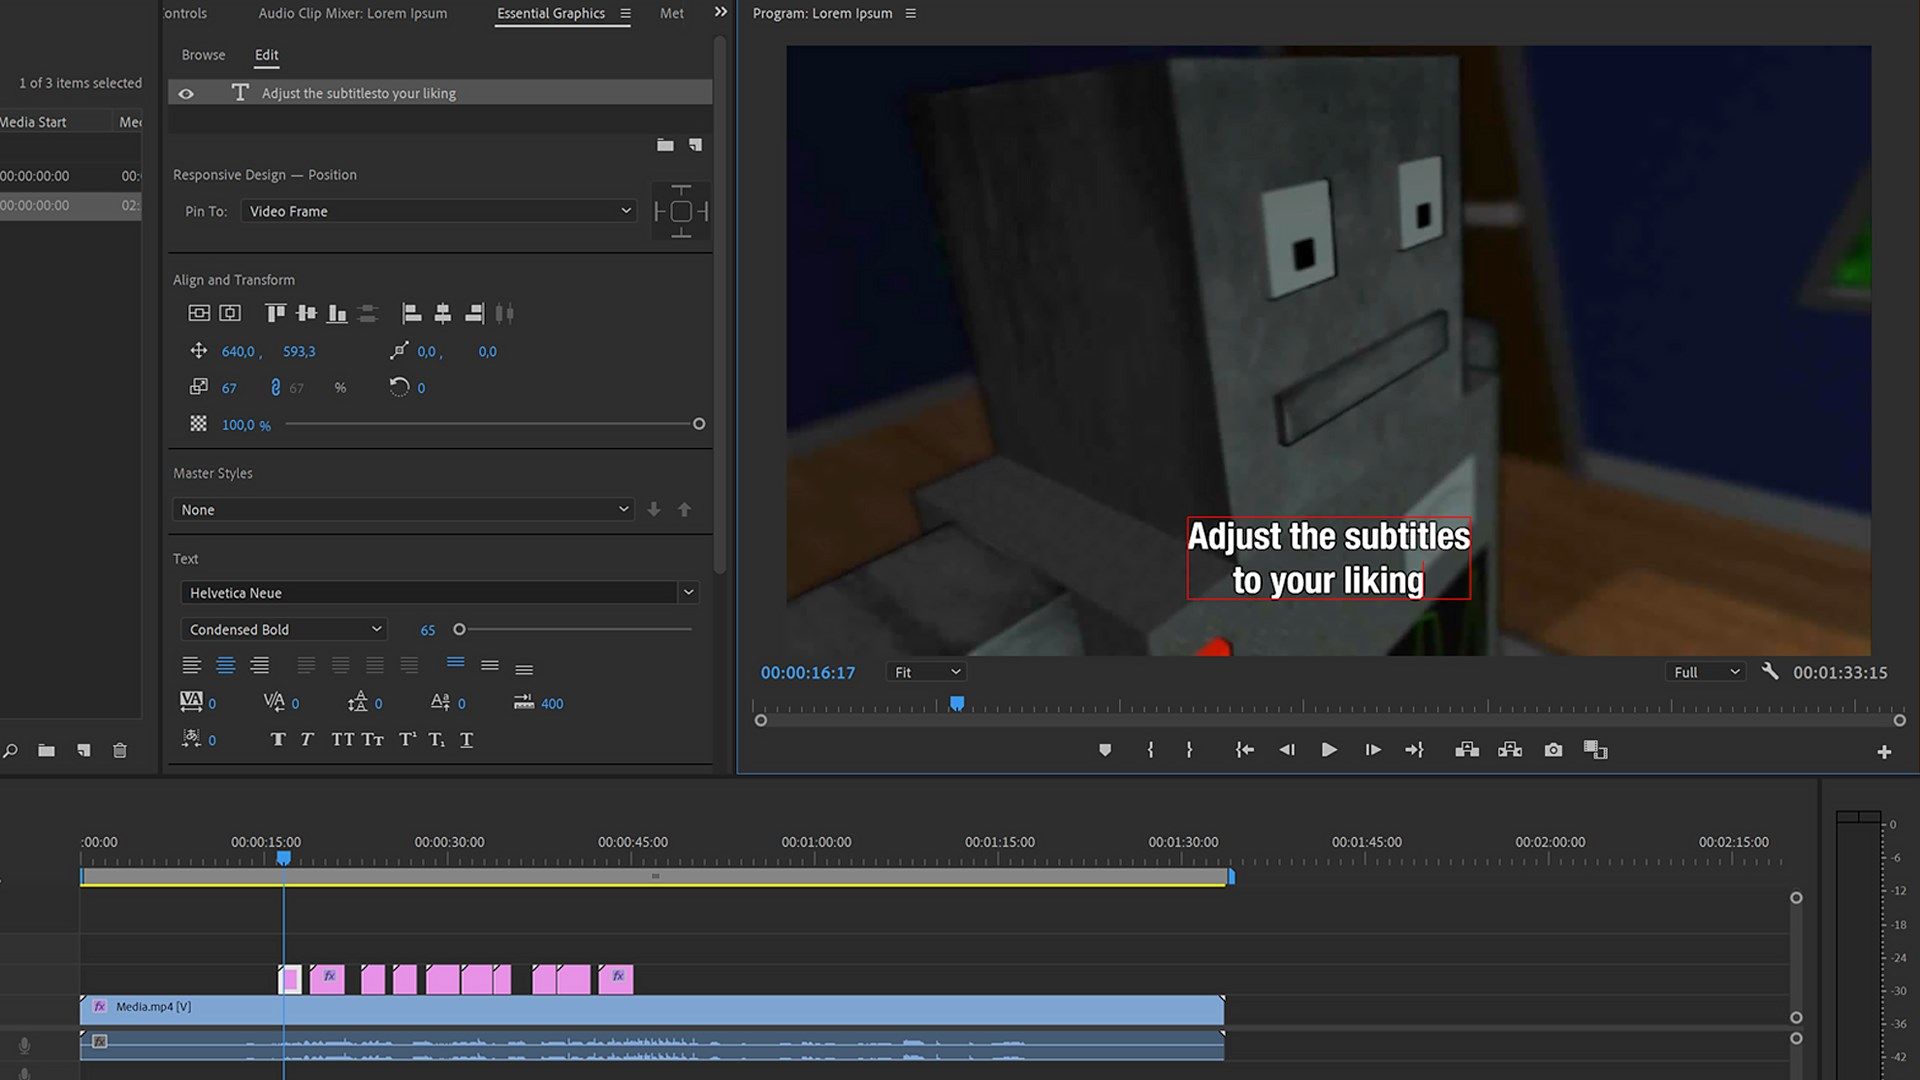 Overlay the subtitles as Essential Graphics layers onto your video, and adjust them if you need to.